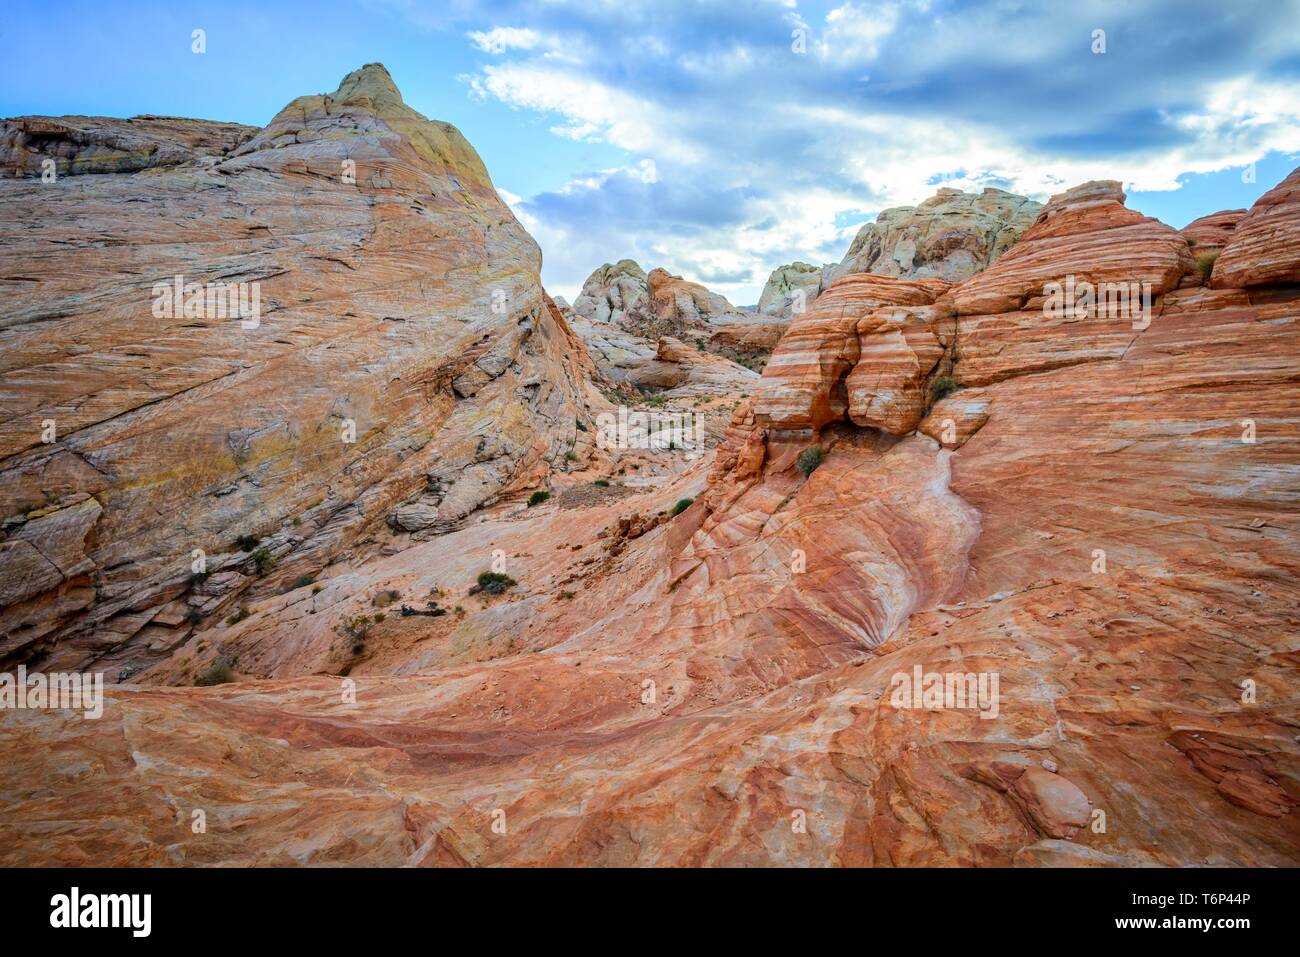 Colorful, Red Orange Rock Formations, Sandstone Rock, Hiking Trail, White Dome Trail, Valley of Fire State Park, Mojave Desert, Nevada, USA Stock Photo